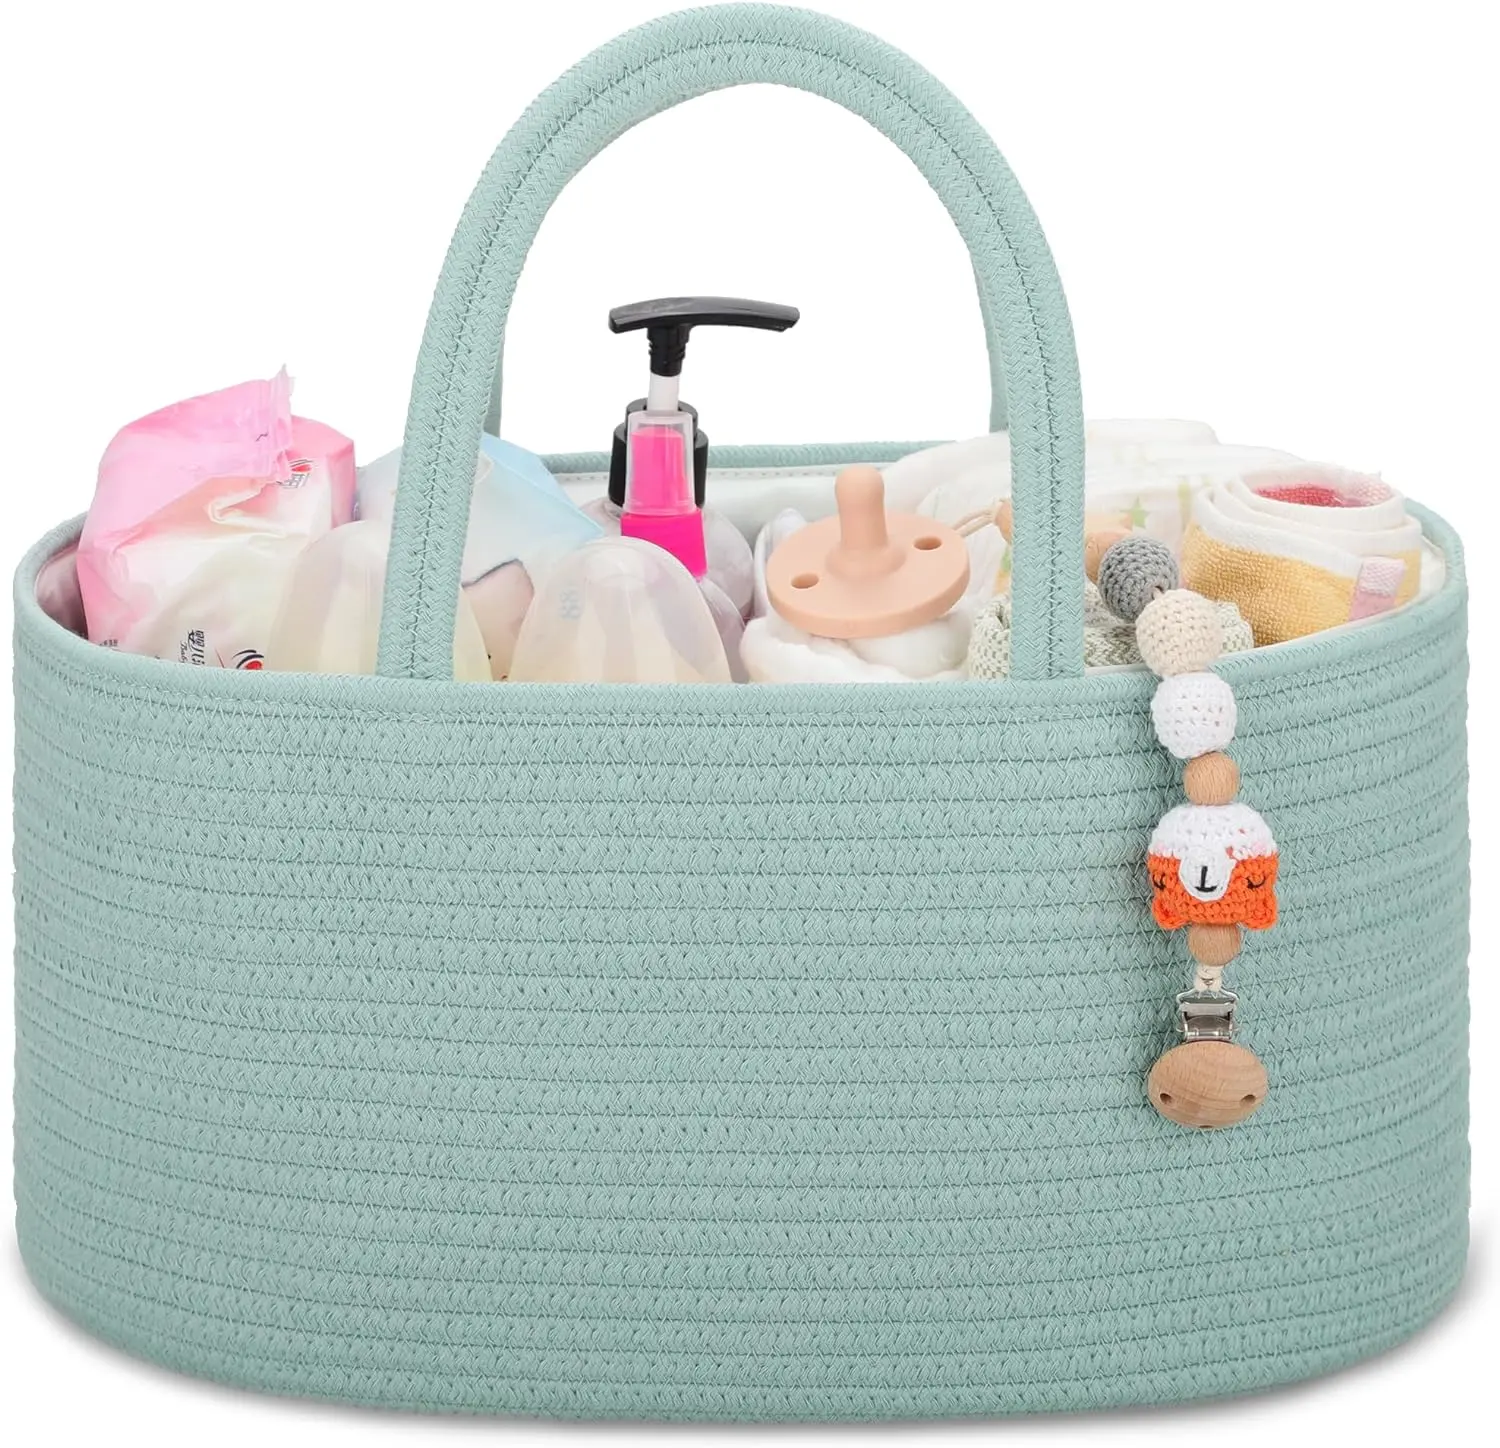 Portable Nappy Tote Bag Baby Woven Diaper Caddy Organizer Diaper Basket with Dividers